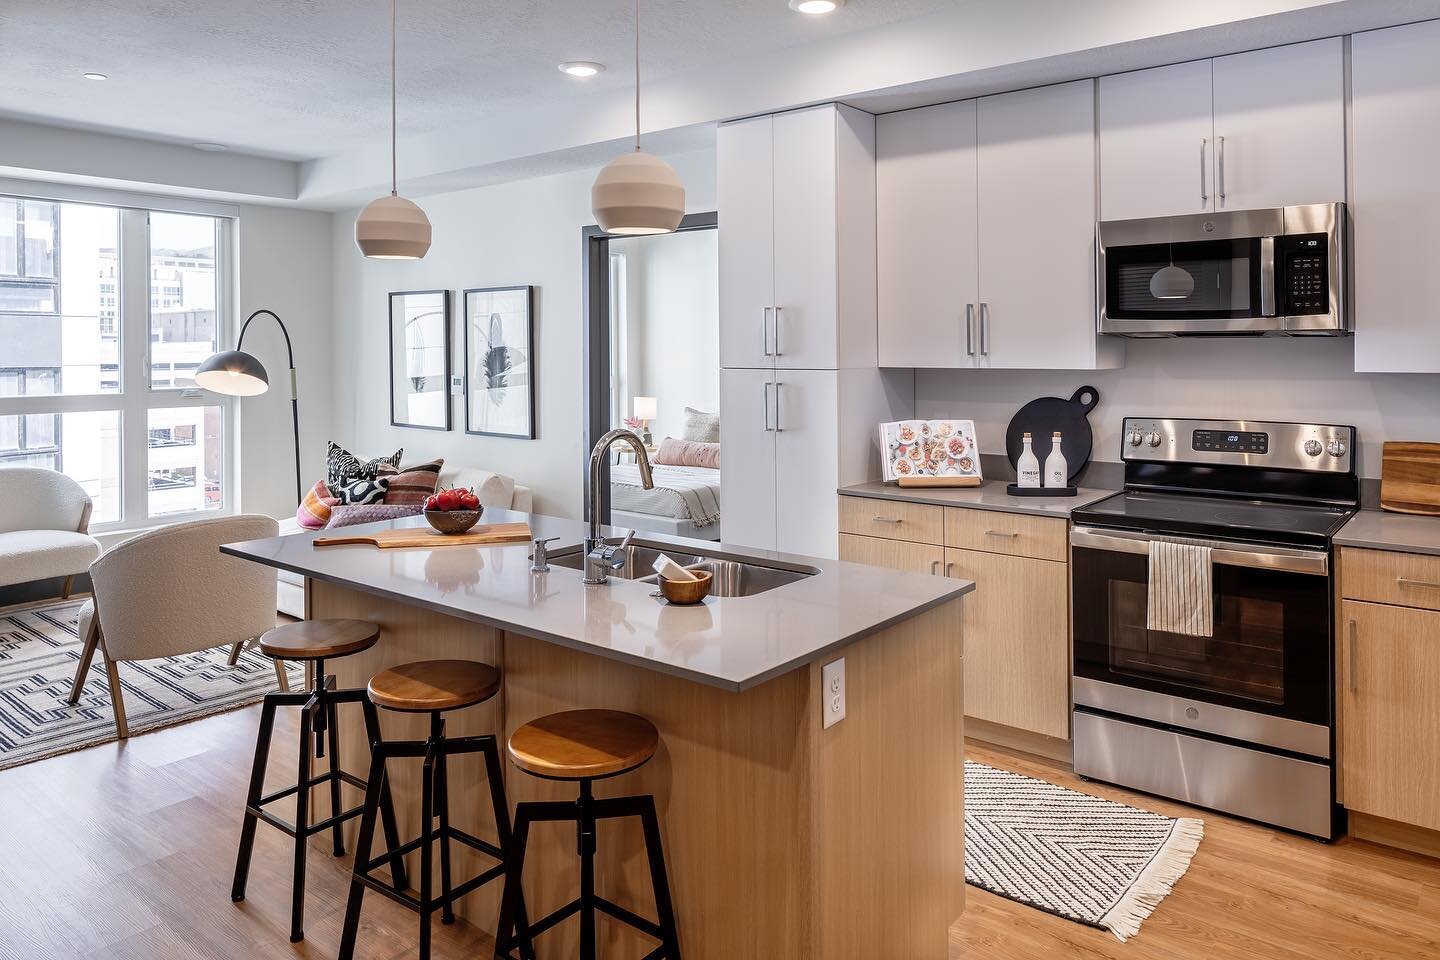 This could be the kitchen in your new home! 

We&rsquo;d love to give you a tour and have you take advantage of our current leasing special:

Get six weeks off a 15-month lease when you lease by May 26th!

More details and pricing in our stories.

#d